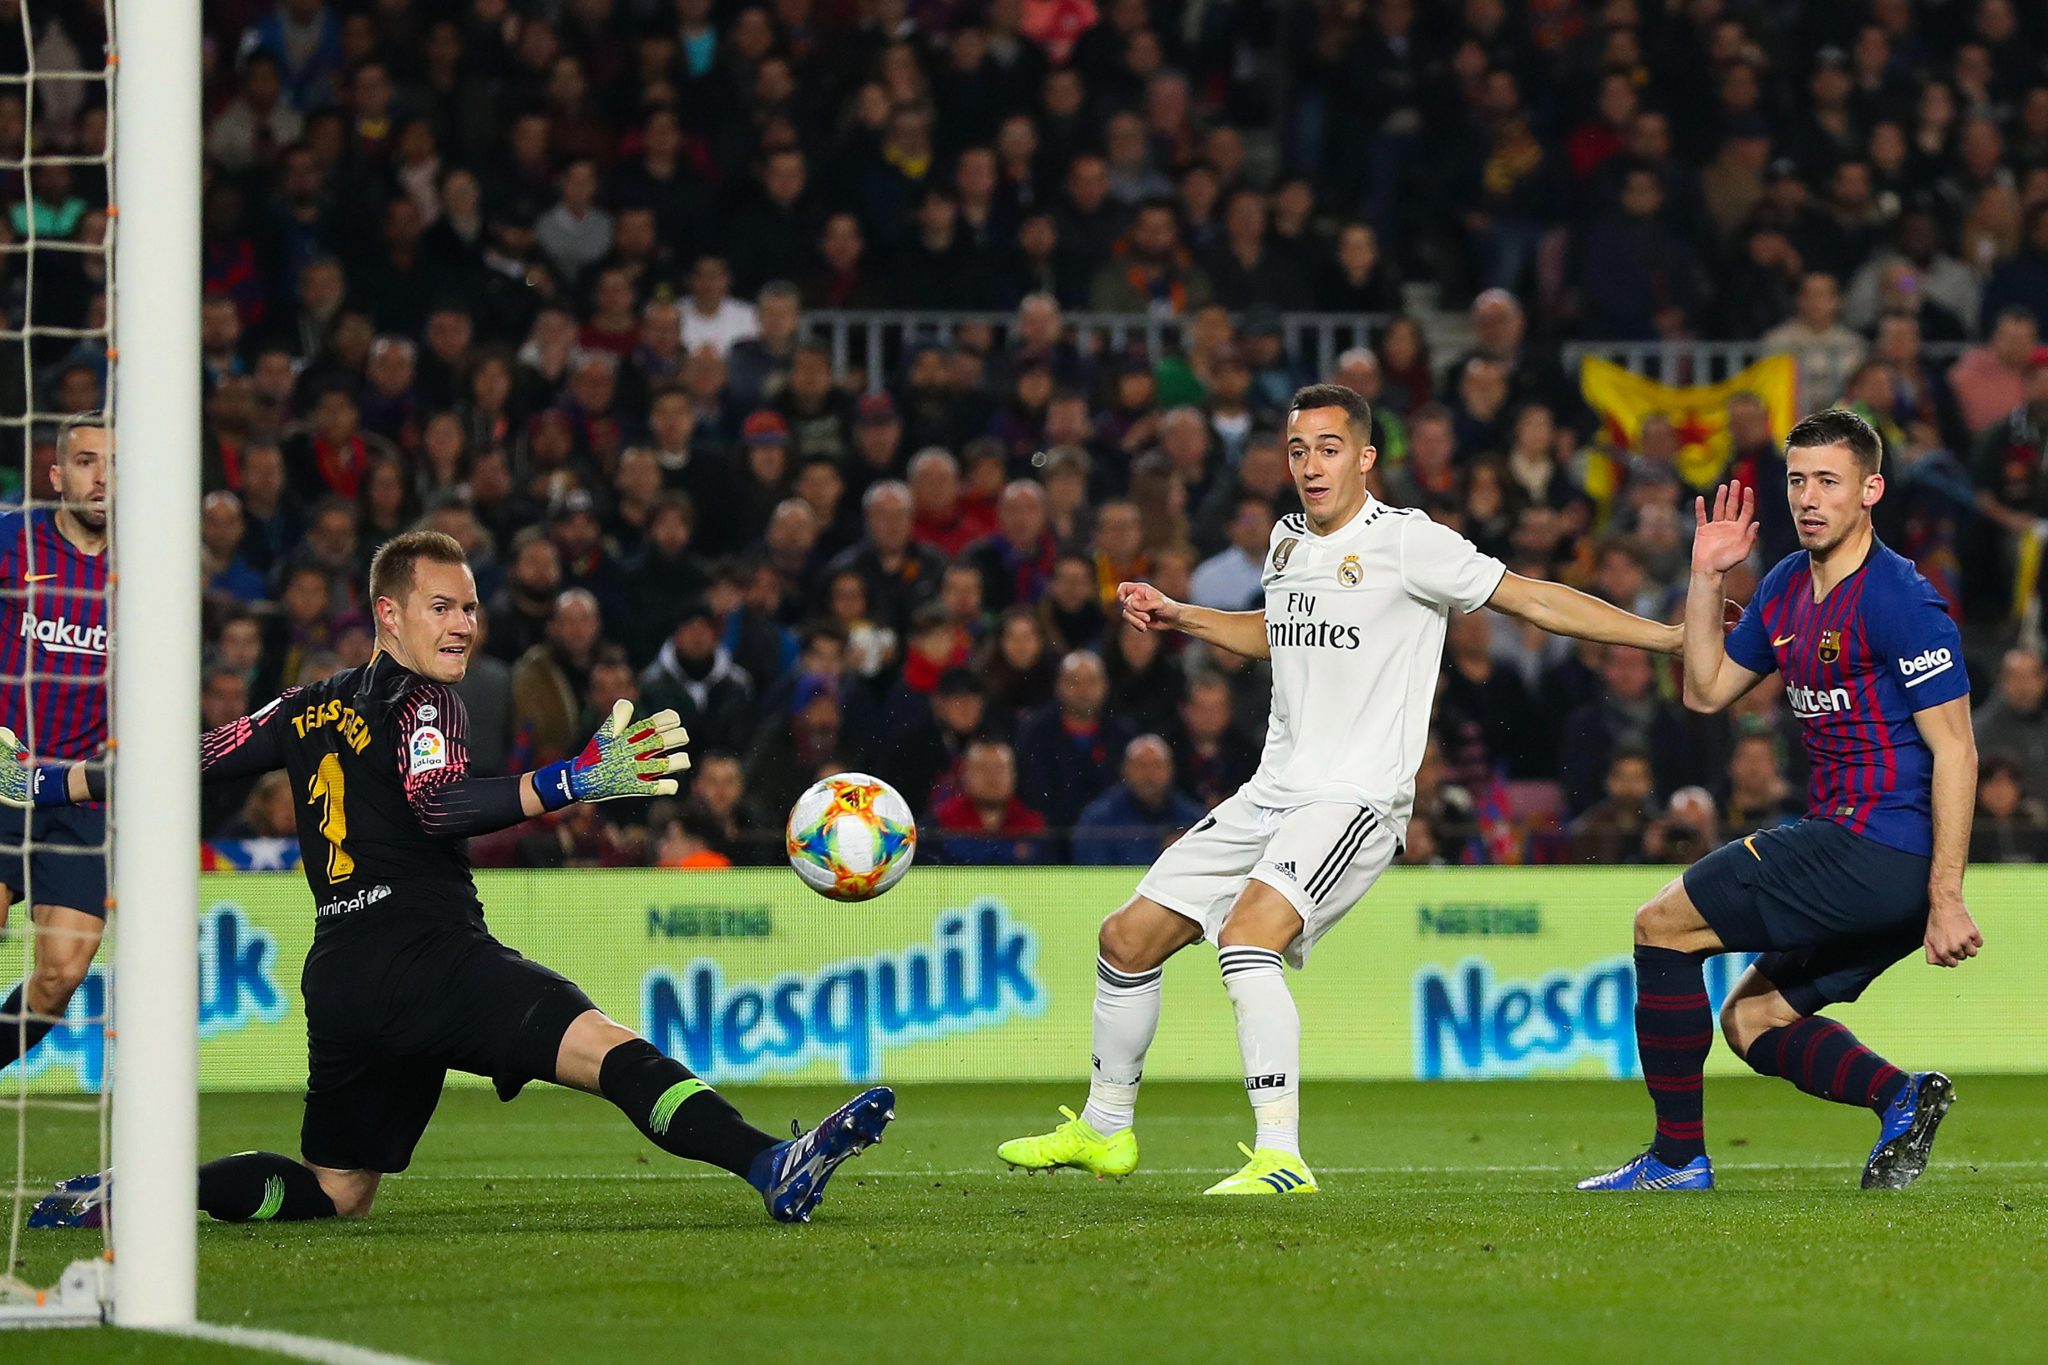 barcelona-1-1-real-madrid-malcom-cancels-out-lucas-vazquezs-strike-in-copa-del-rey-semi-final-as-gareth-bale-misses-a-sitter-at-the-death-1.jpg